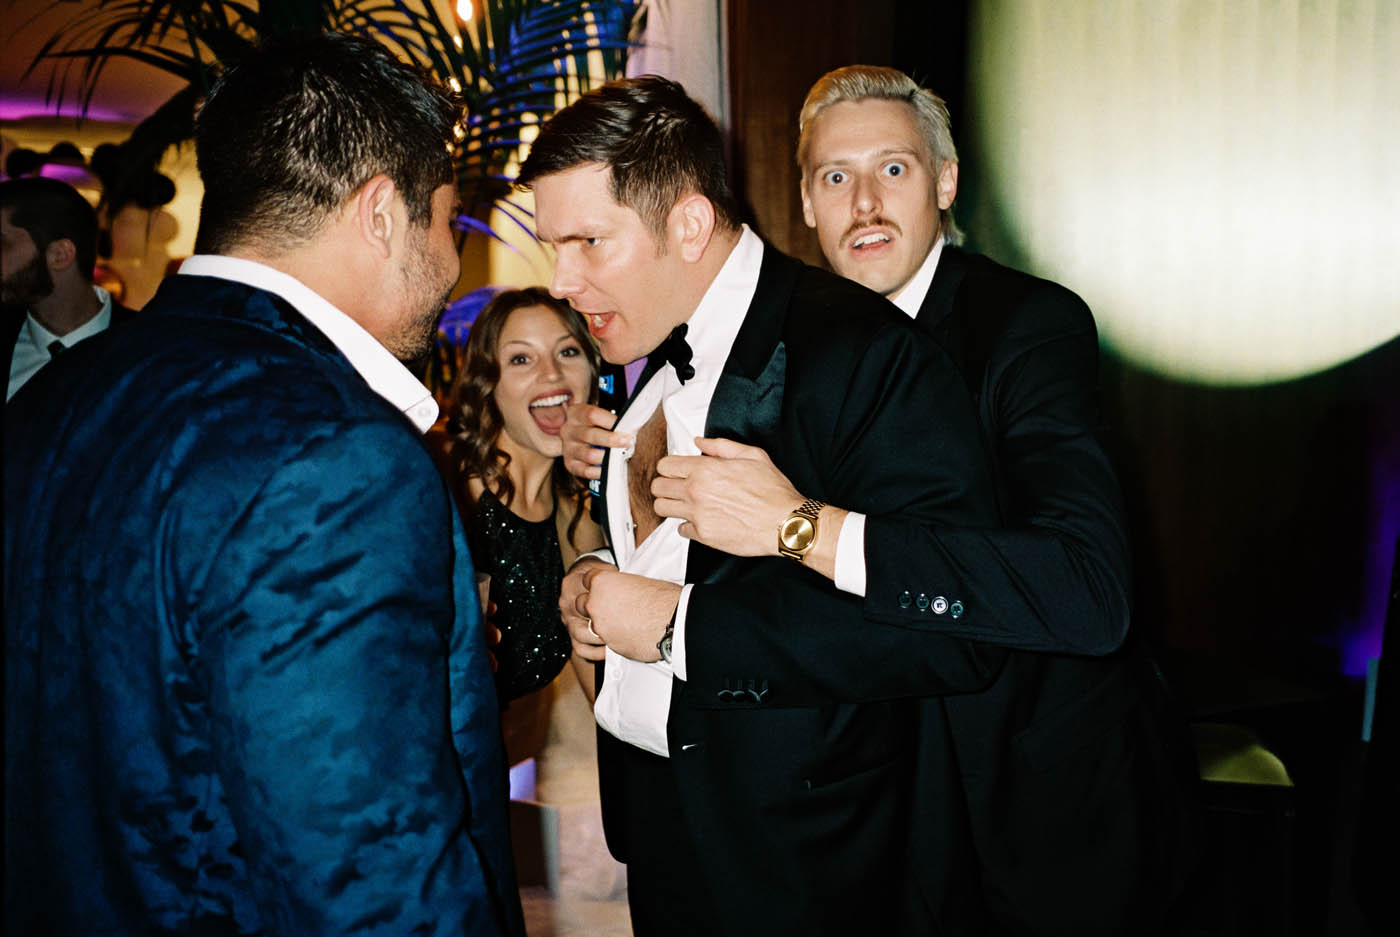 the groom's shirt is pulled open by a humorous guest